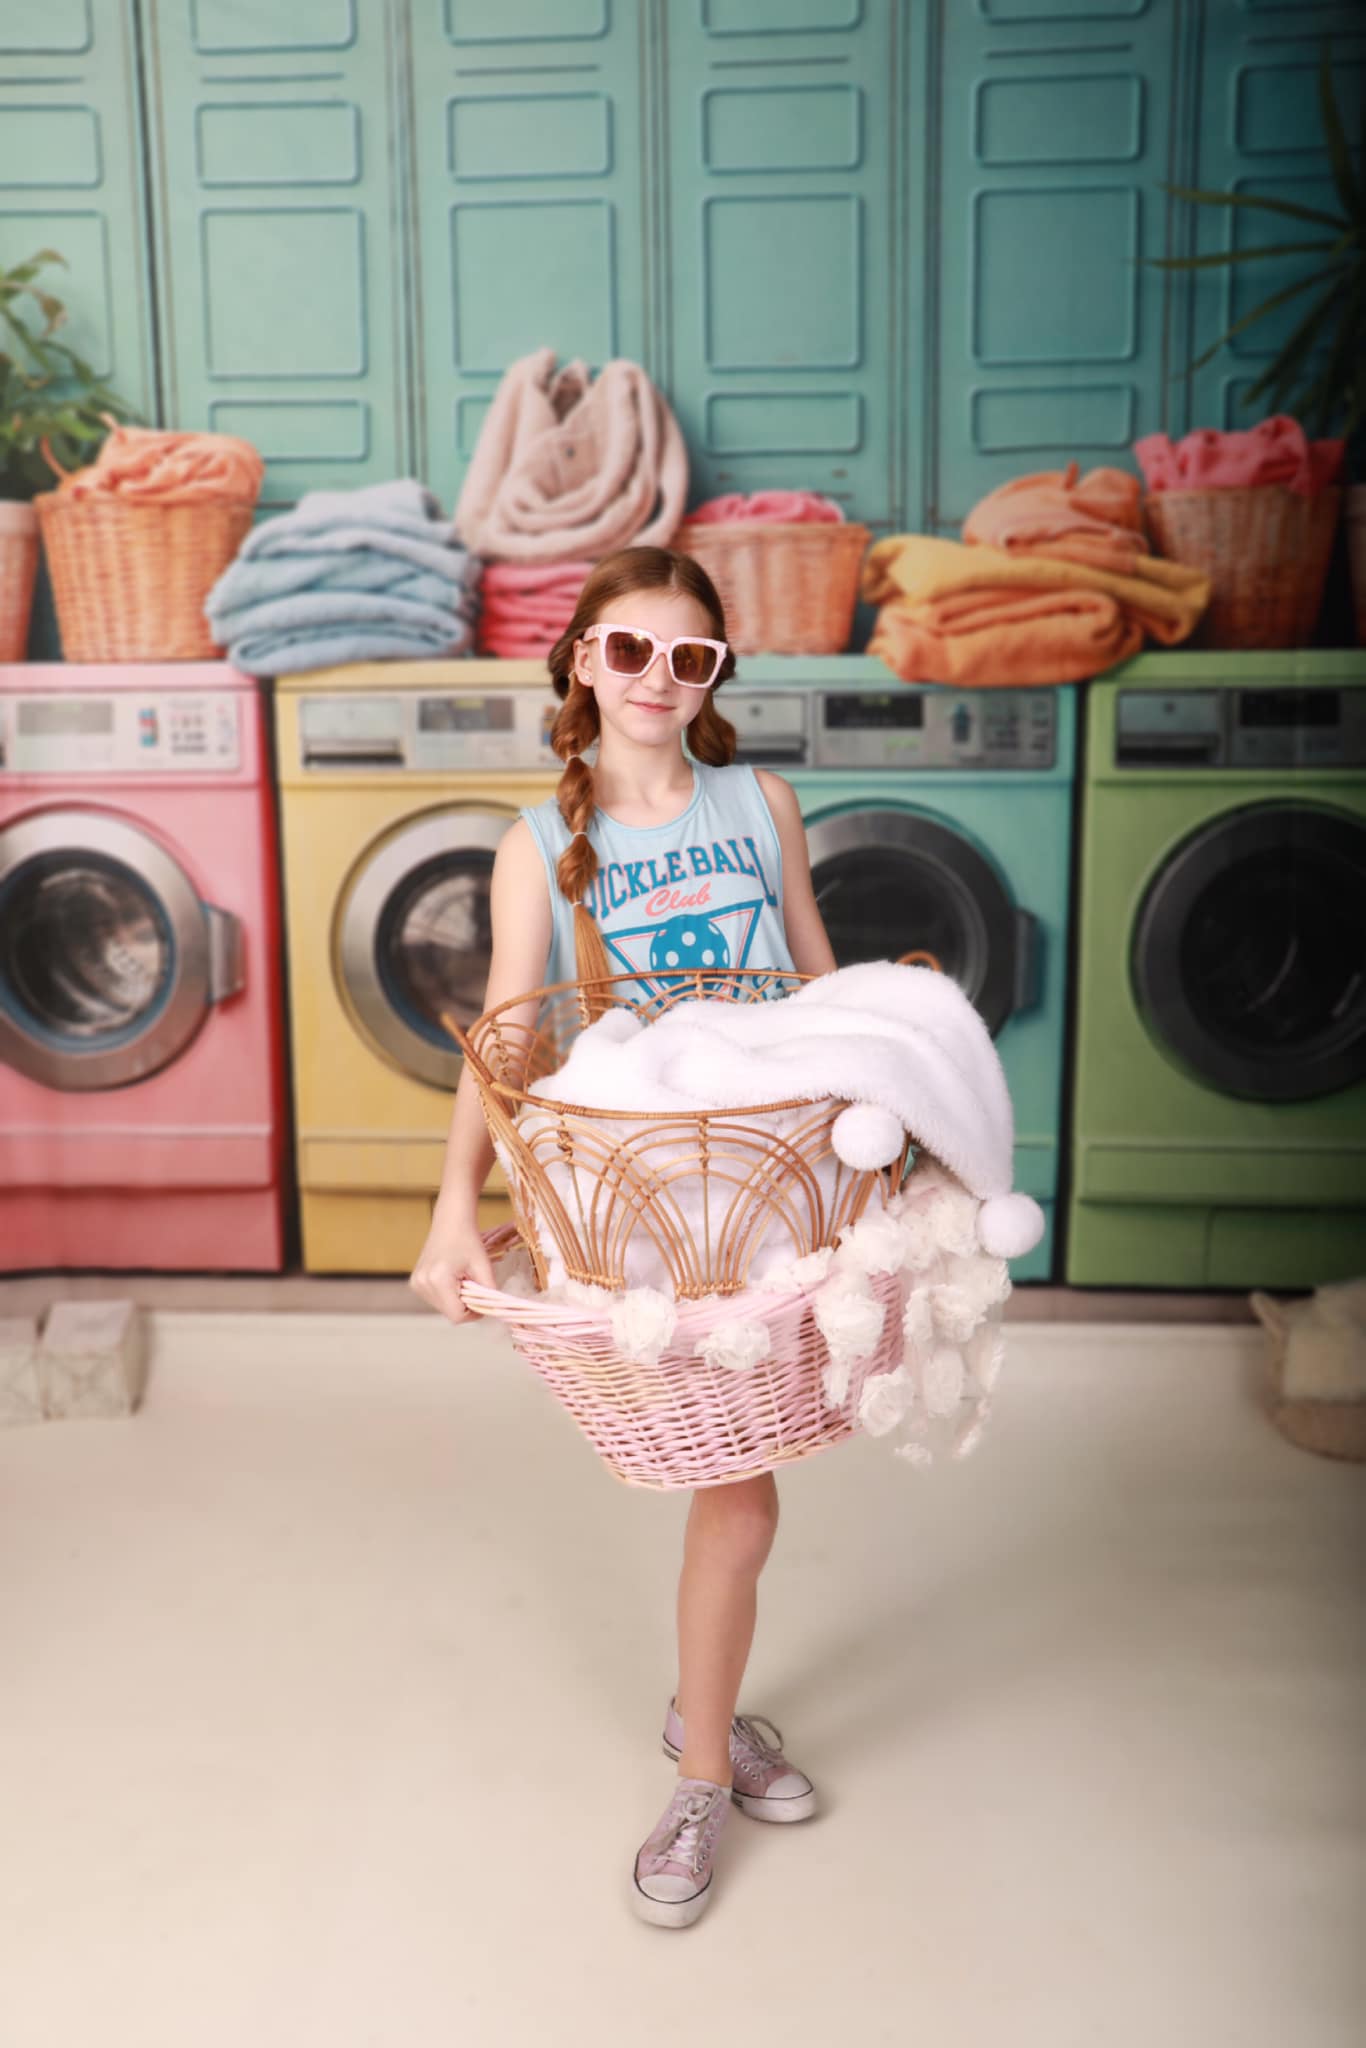 Girl holding laundry basket standing in front of washing machine backdrop